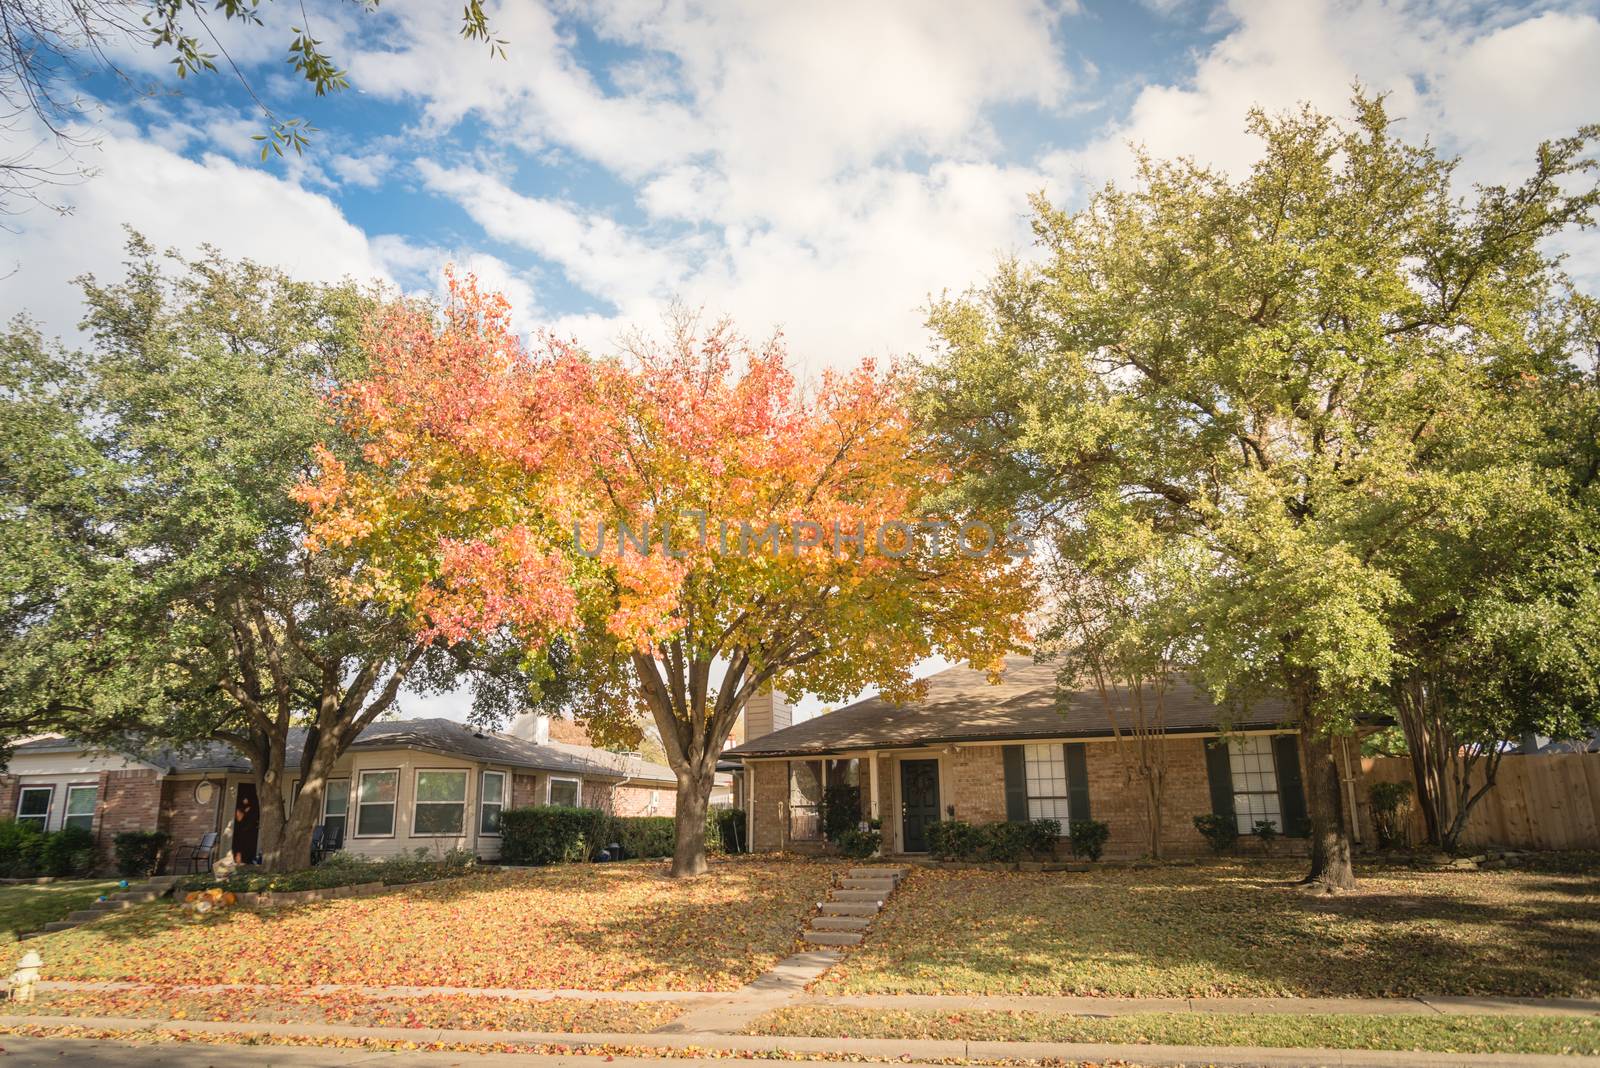 Beautiful front yard of typical single family houses near Dallas in fall season colorful leaves by trongnguyen